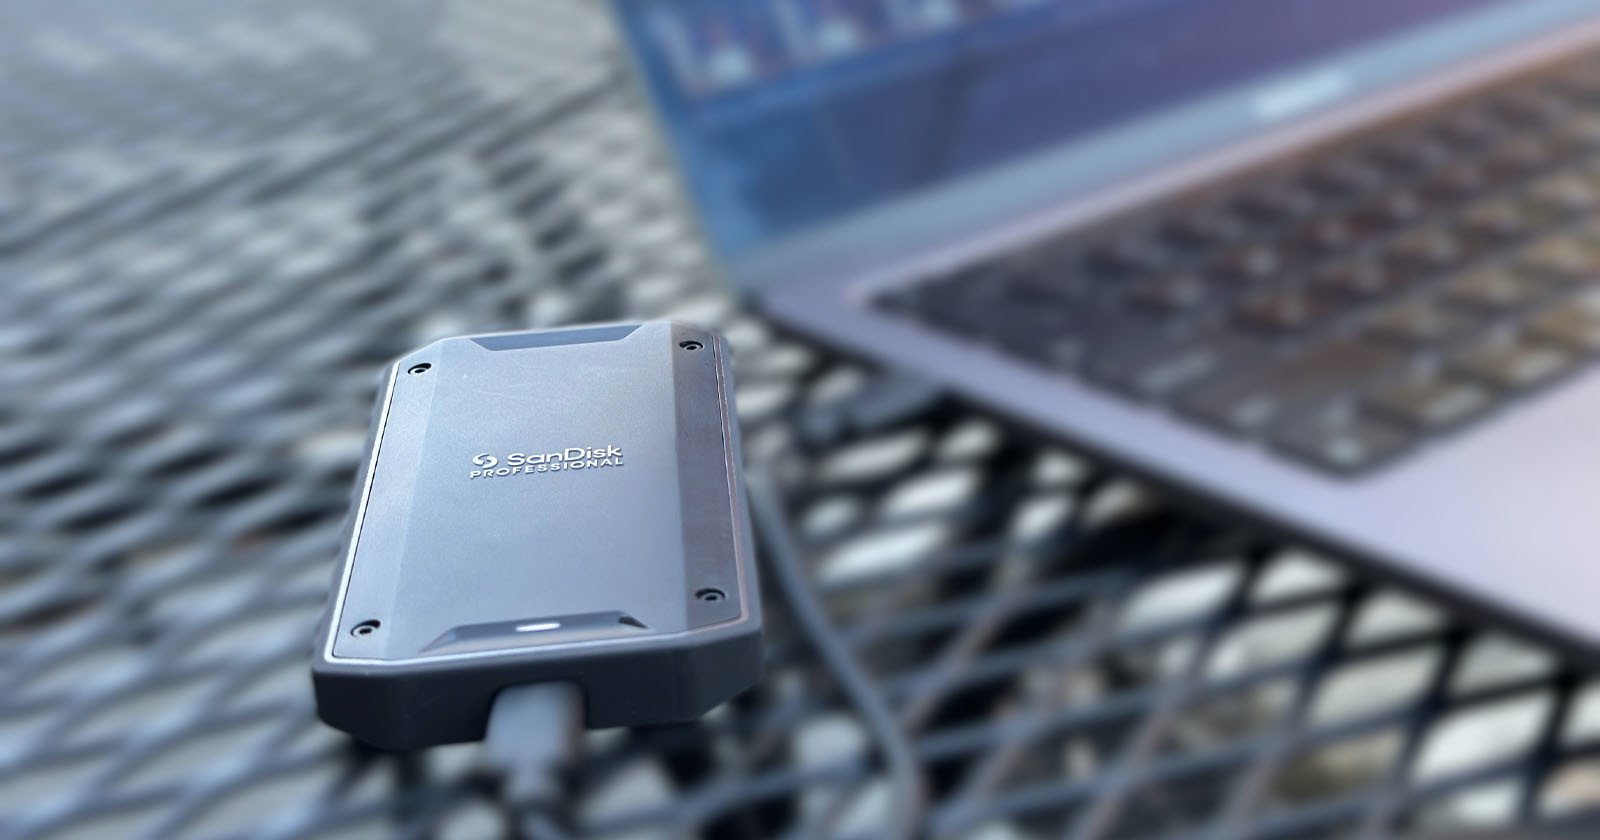 The SanDisk Professional PRO-G40 SSD is the Ideal 4K/6K Video Working Drive